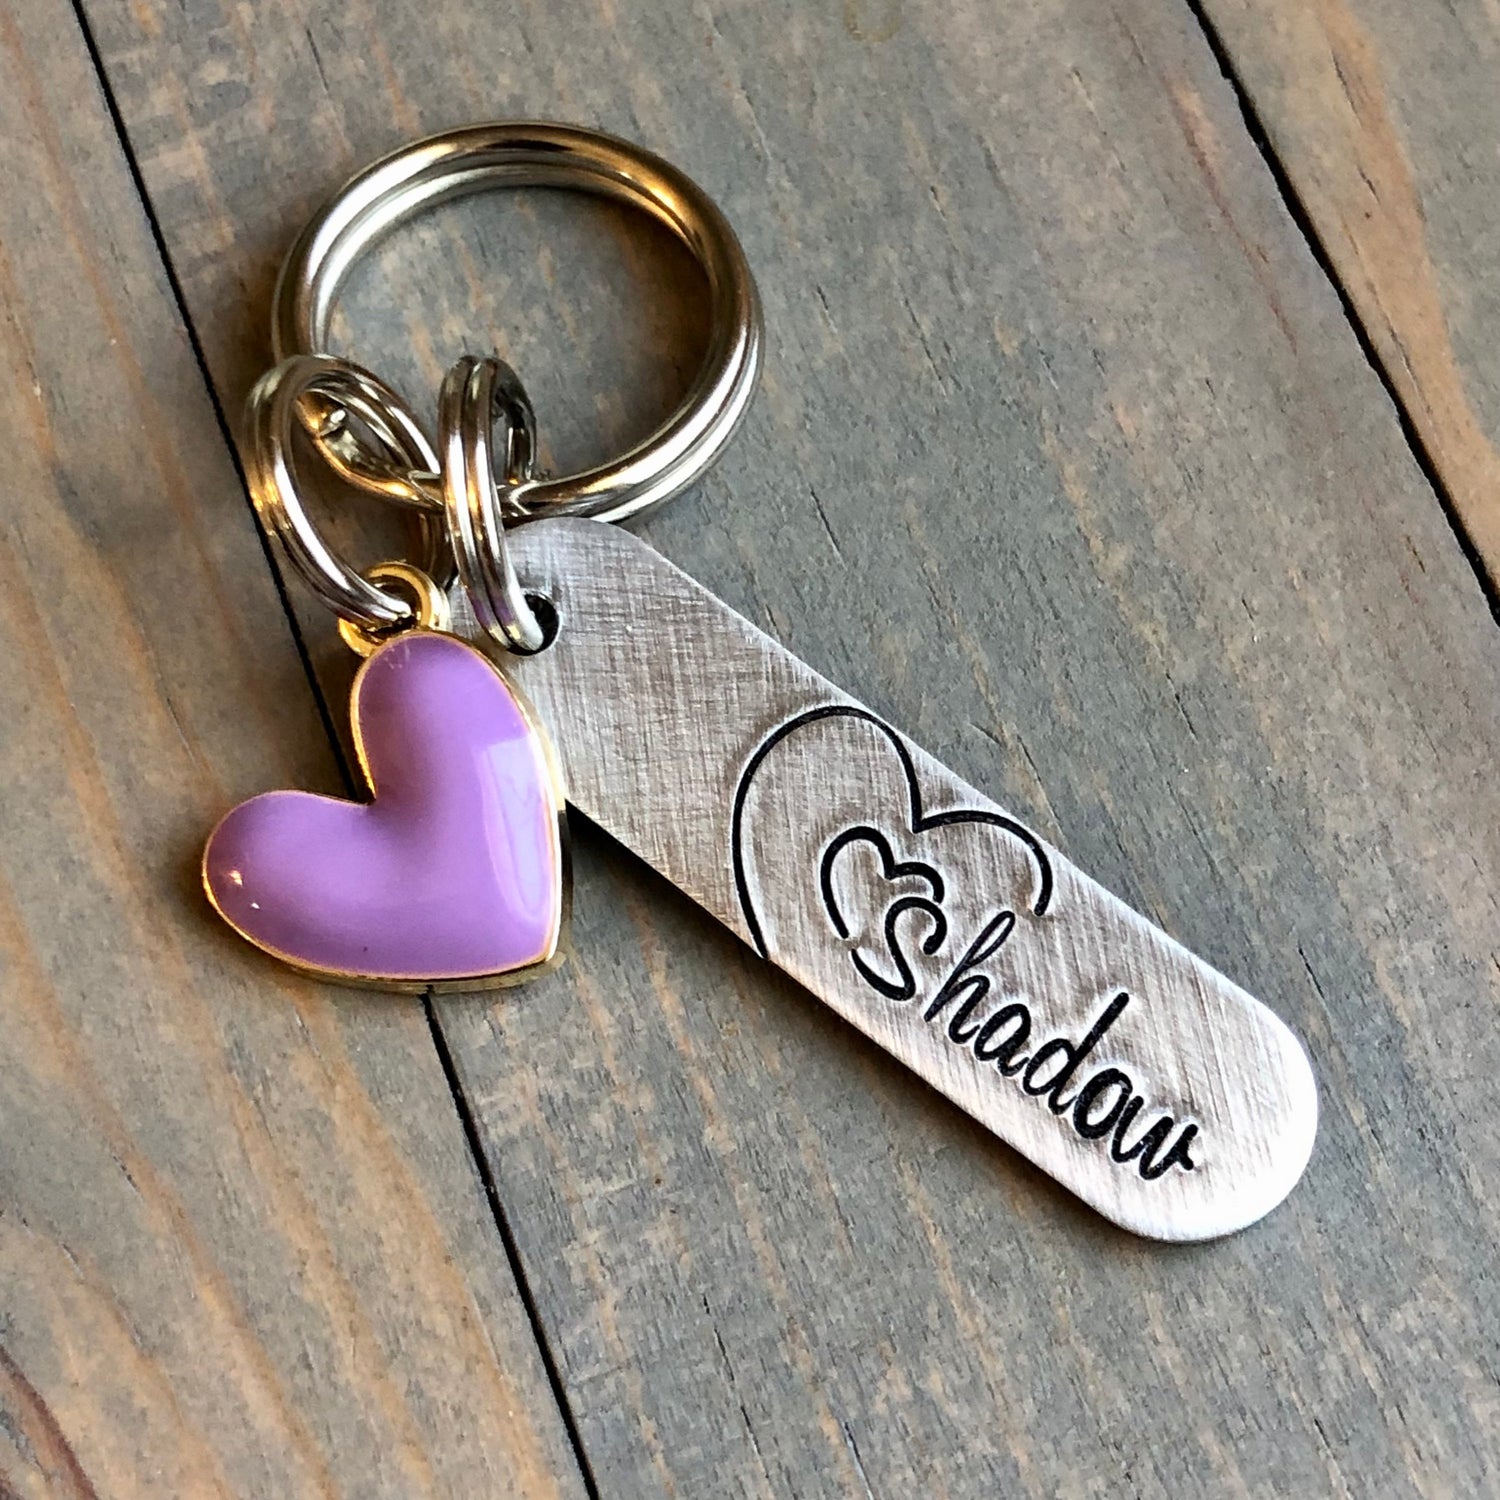  Handmade Personalized Dog Tags Engraved for Pets